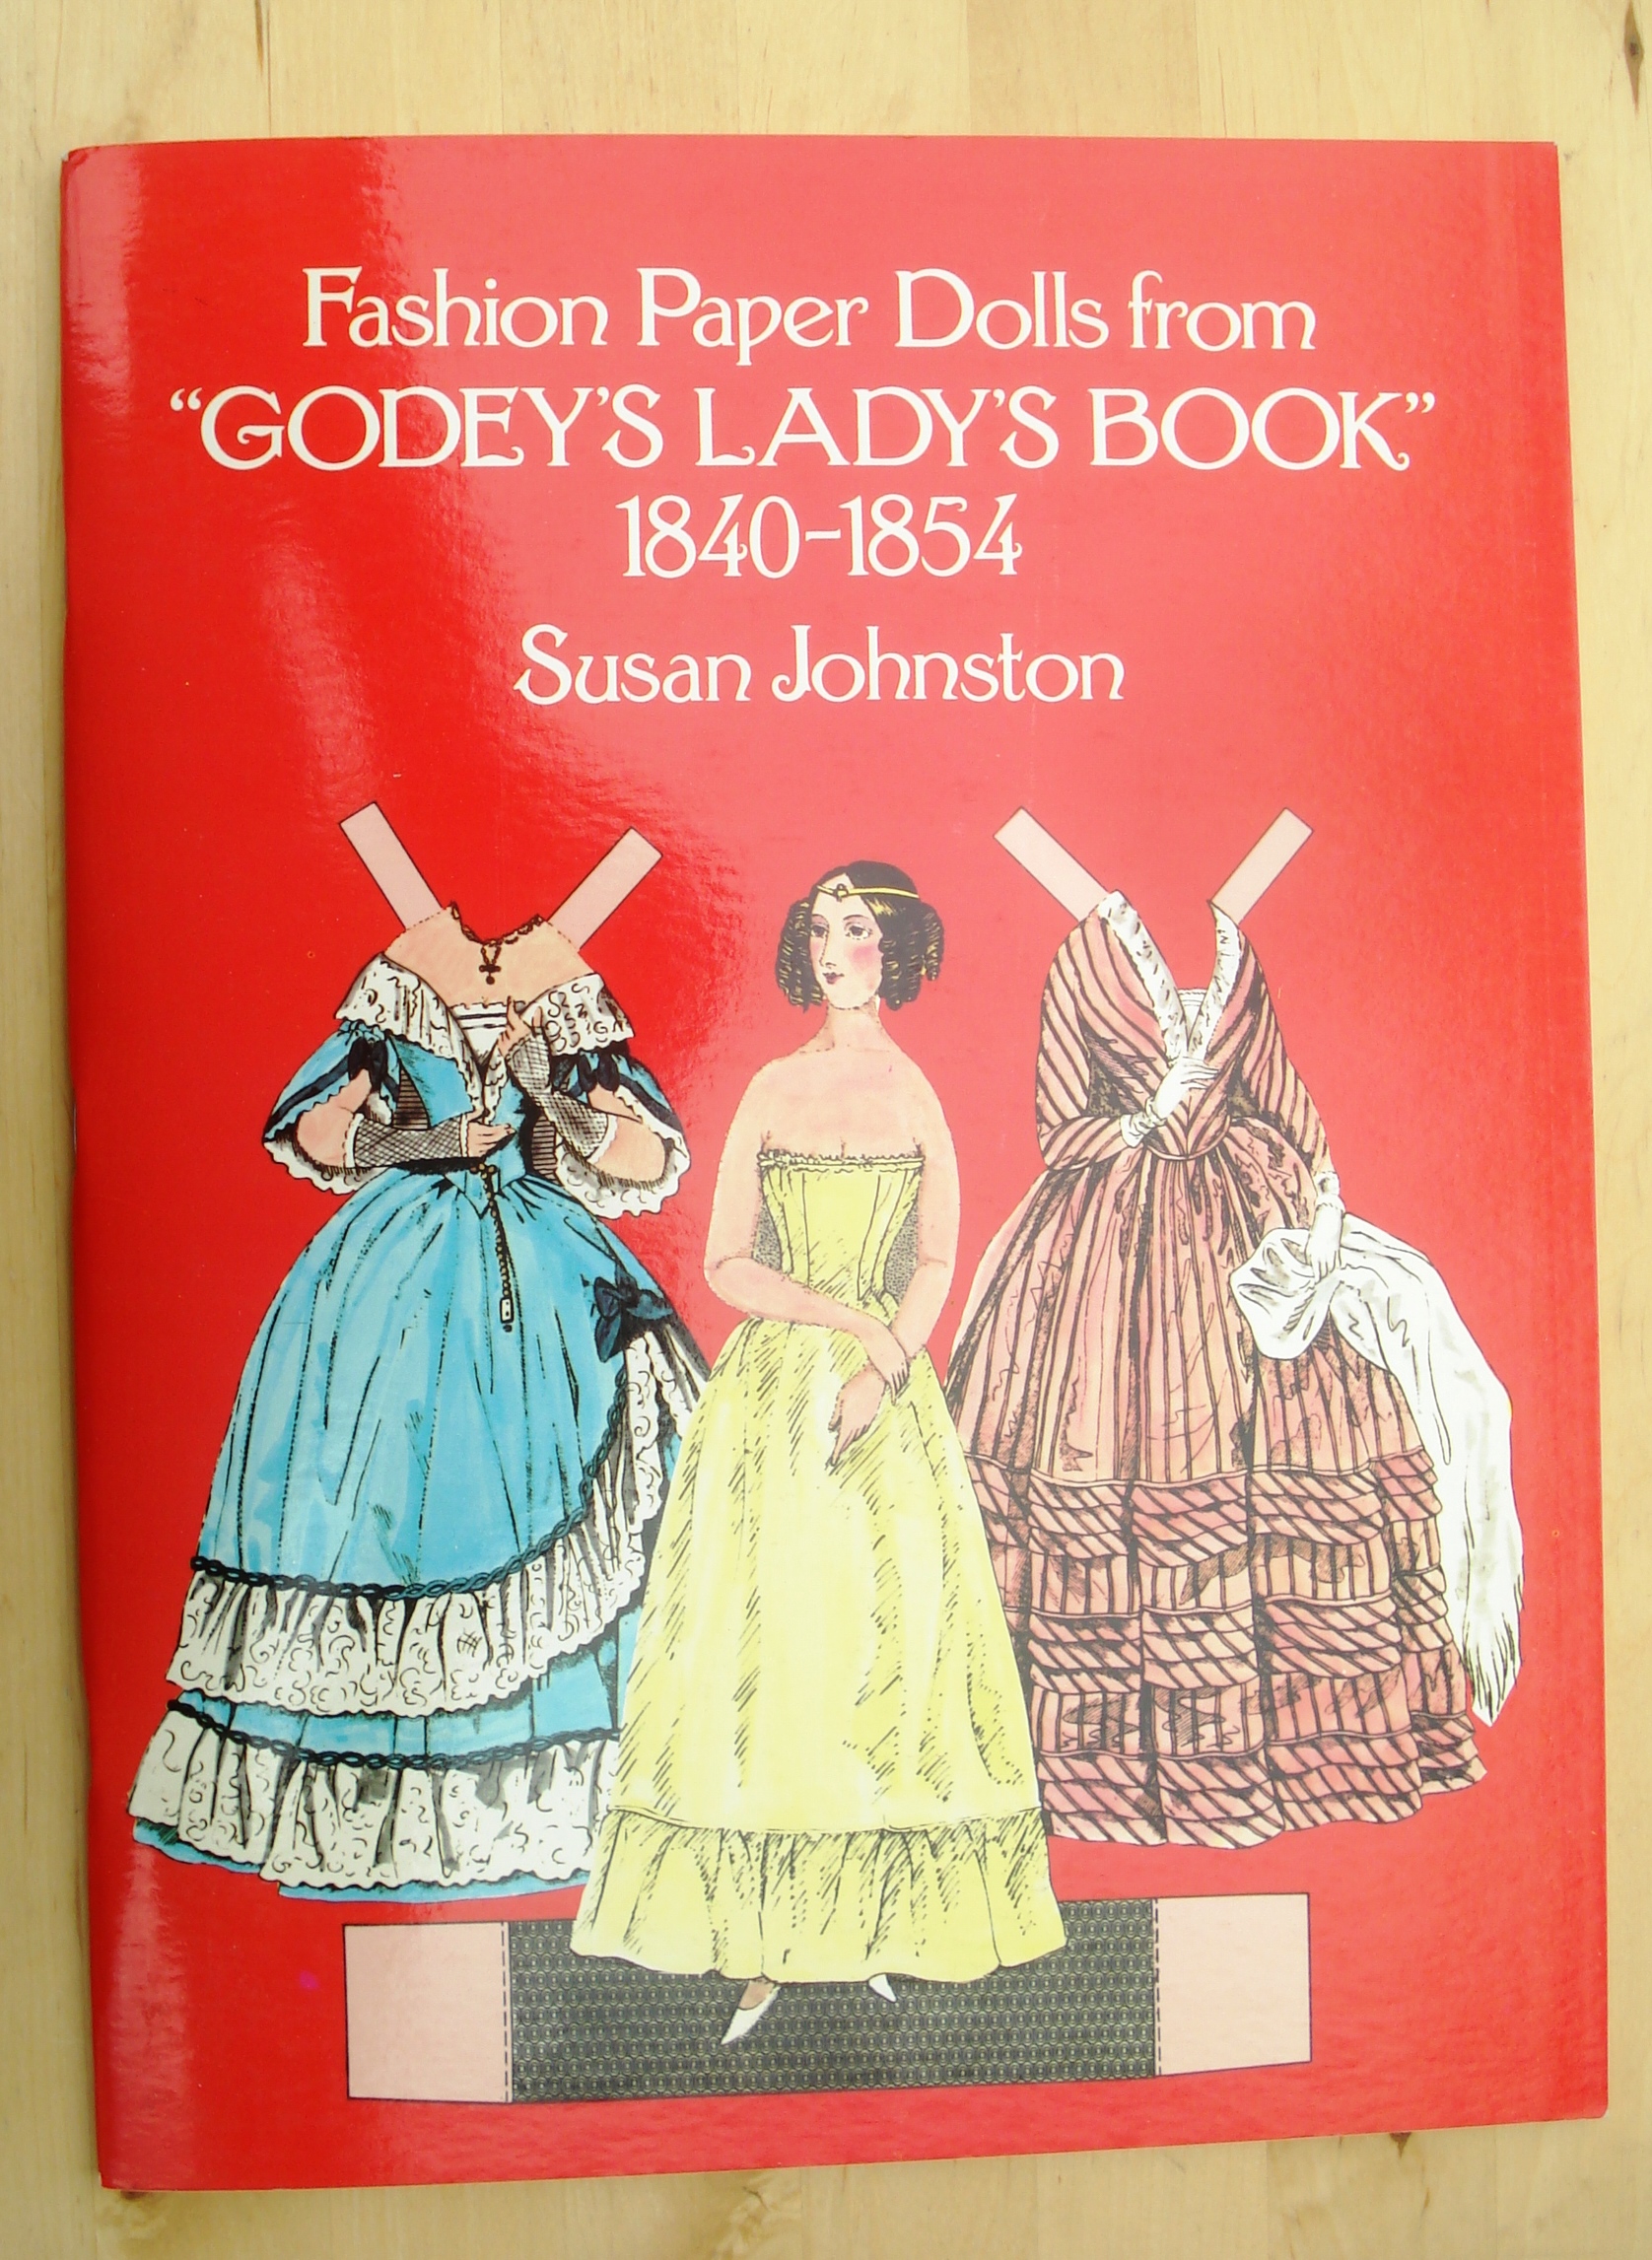 FASHION PAPER DOLLS FROM GODEY'S LADY'S BOOK